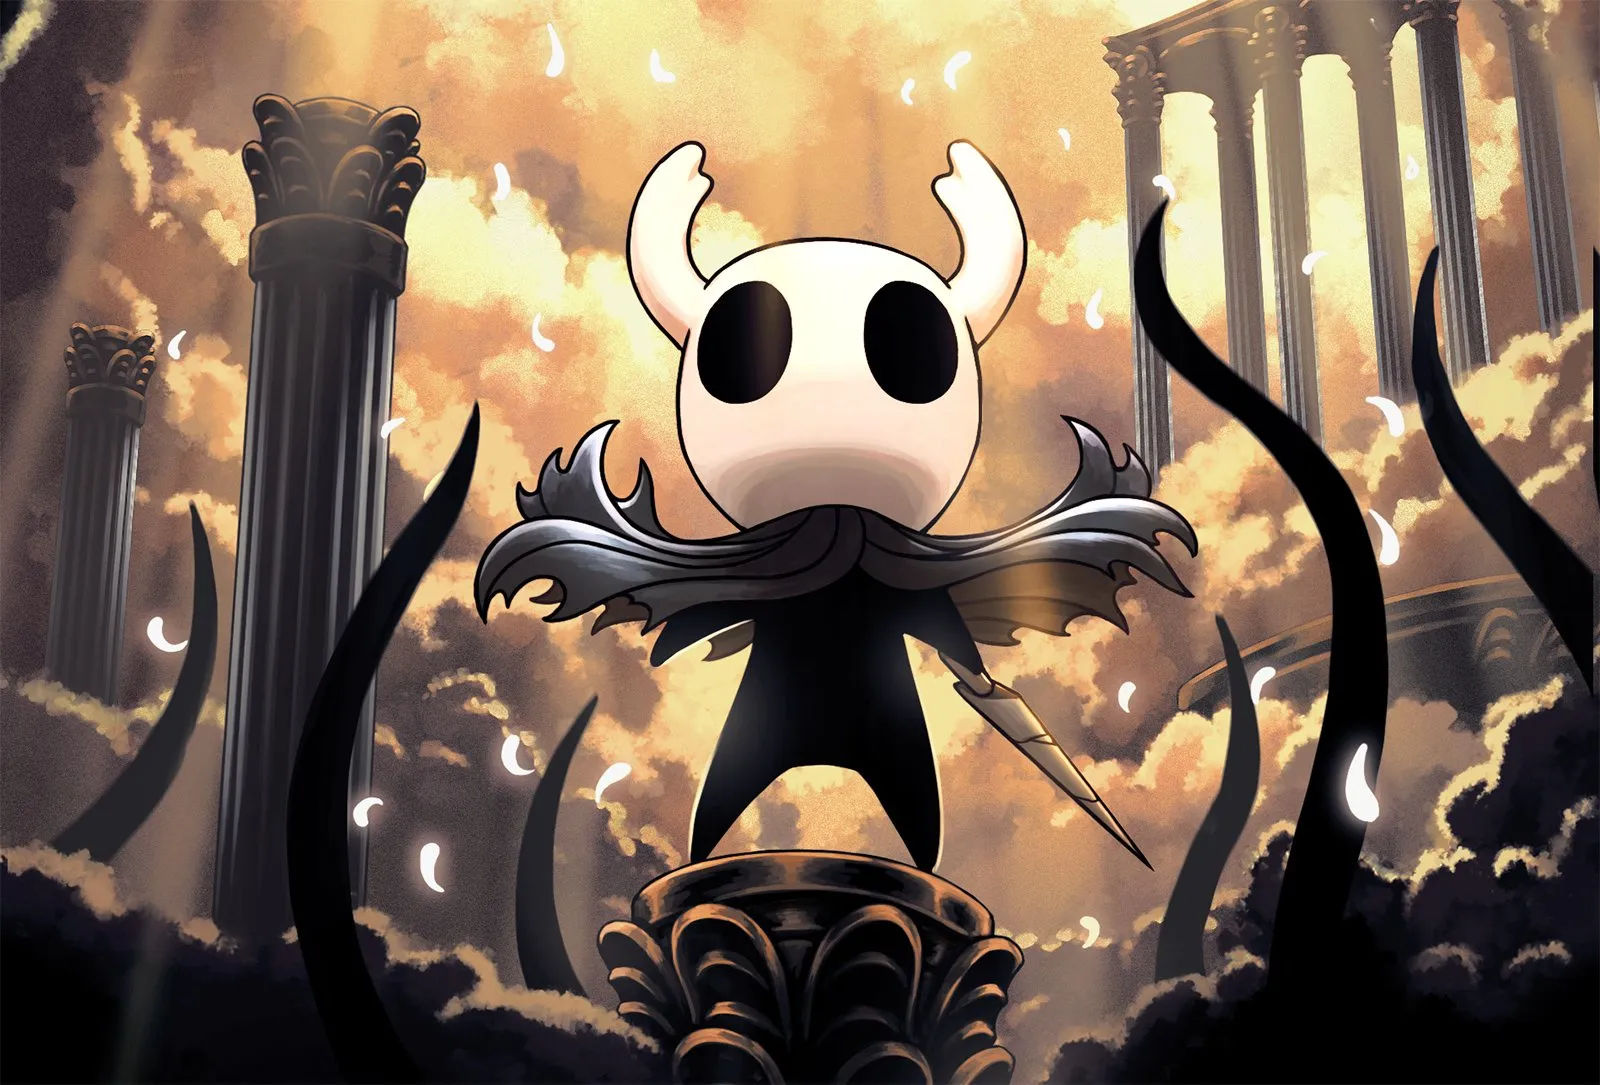 Hollow Knight coming to PS4, Xbox One alongside physical edition